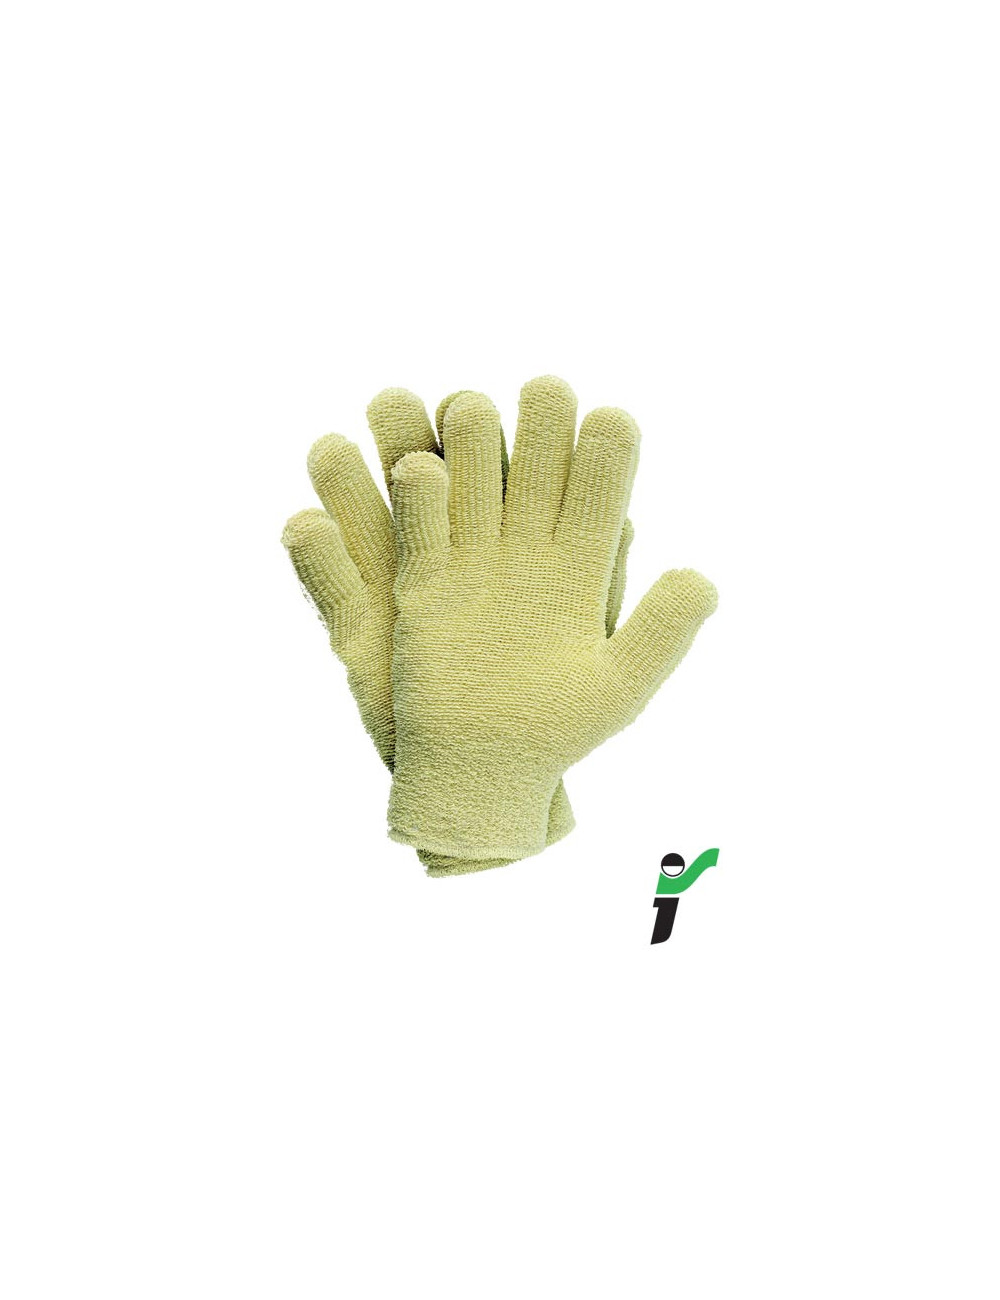 Protective gloves rj-kefro y yellow JS